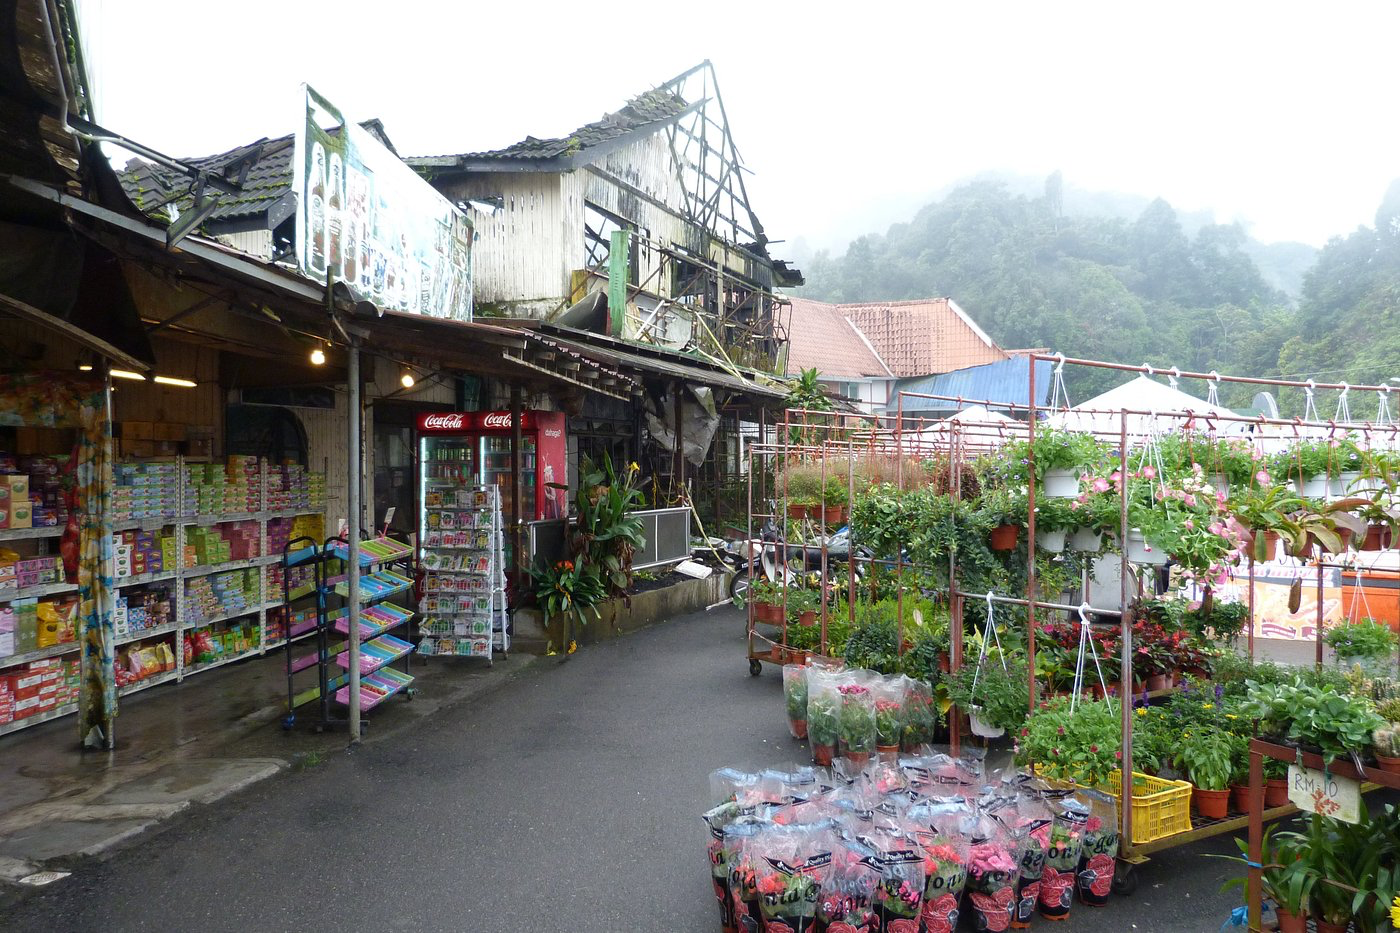 This idyllic location at cameron highlands offers an idyllic experience at rm300+ for 3d2n | weirdkaya